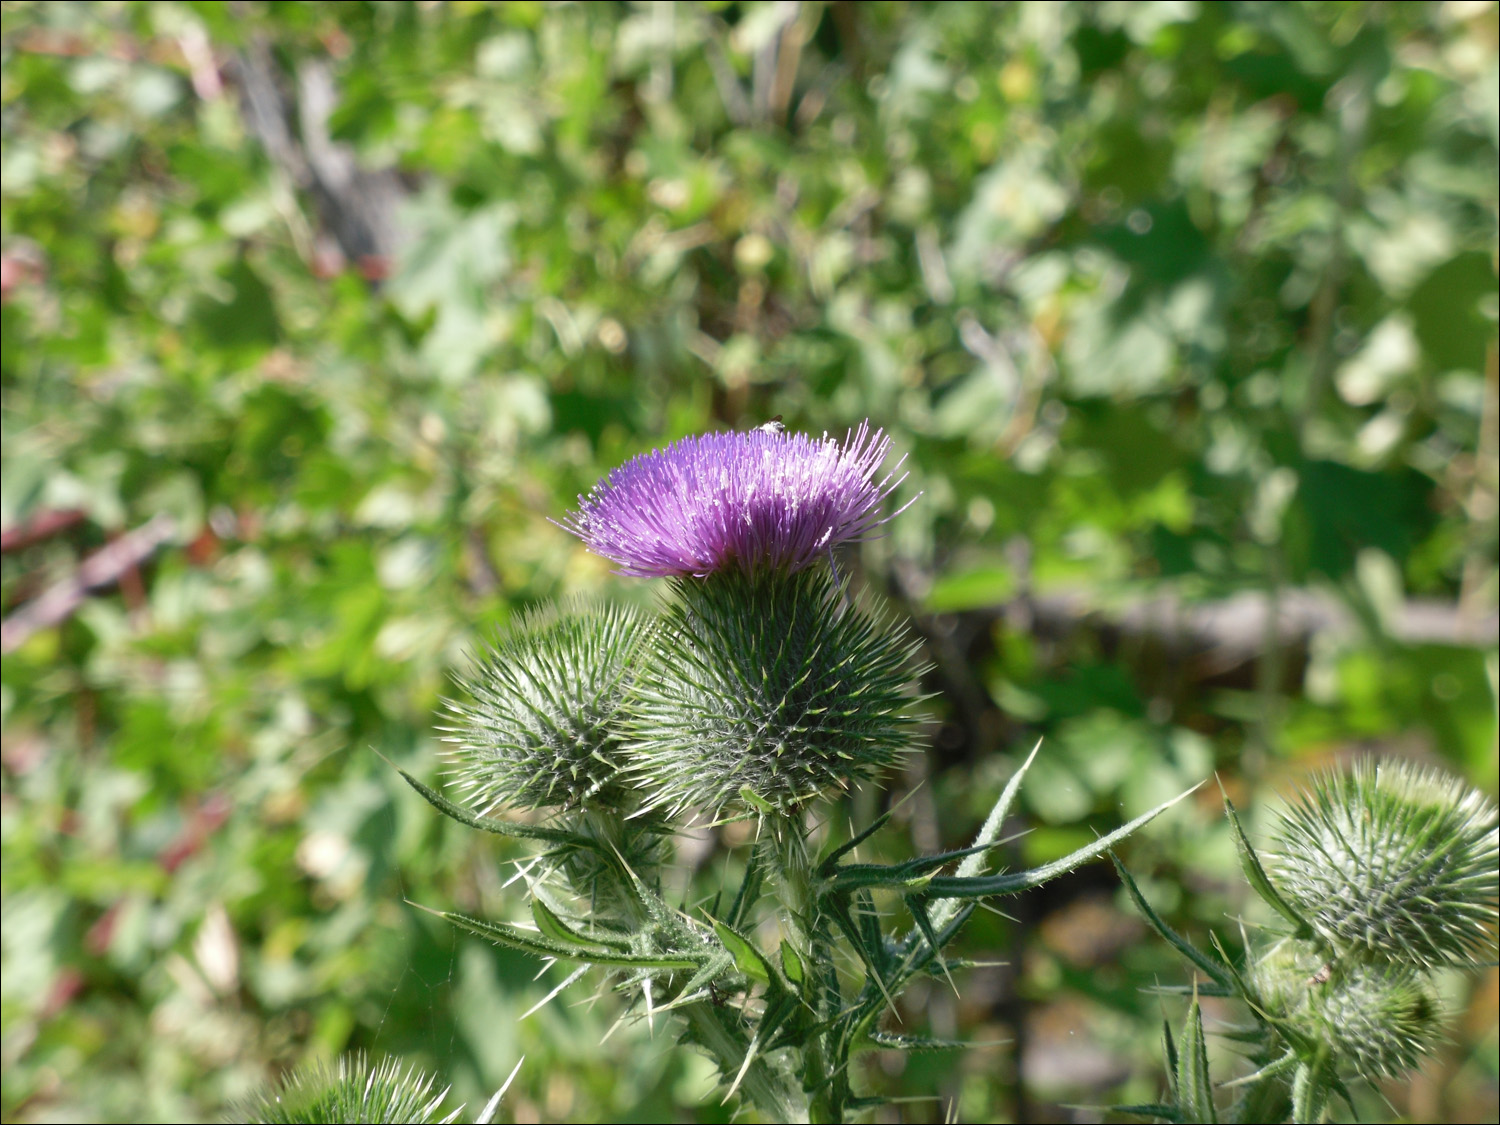 Photos taken at Ryan Dam @ The Grand Fall, an overall drop of 87 ft.~ Thistle plant on Ryan Island